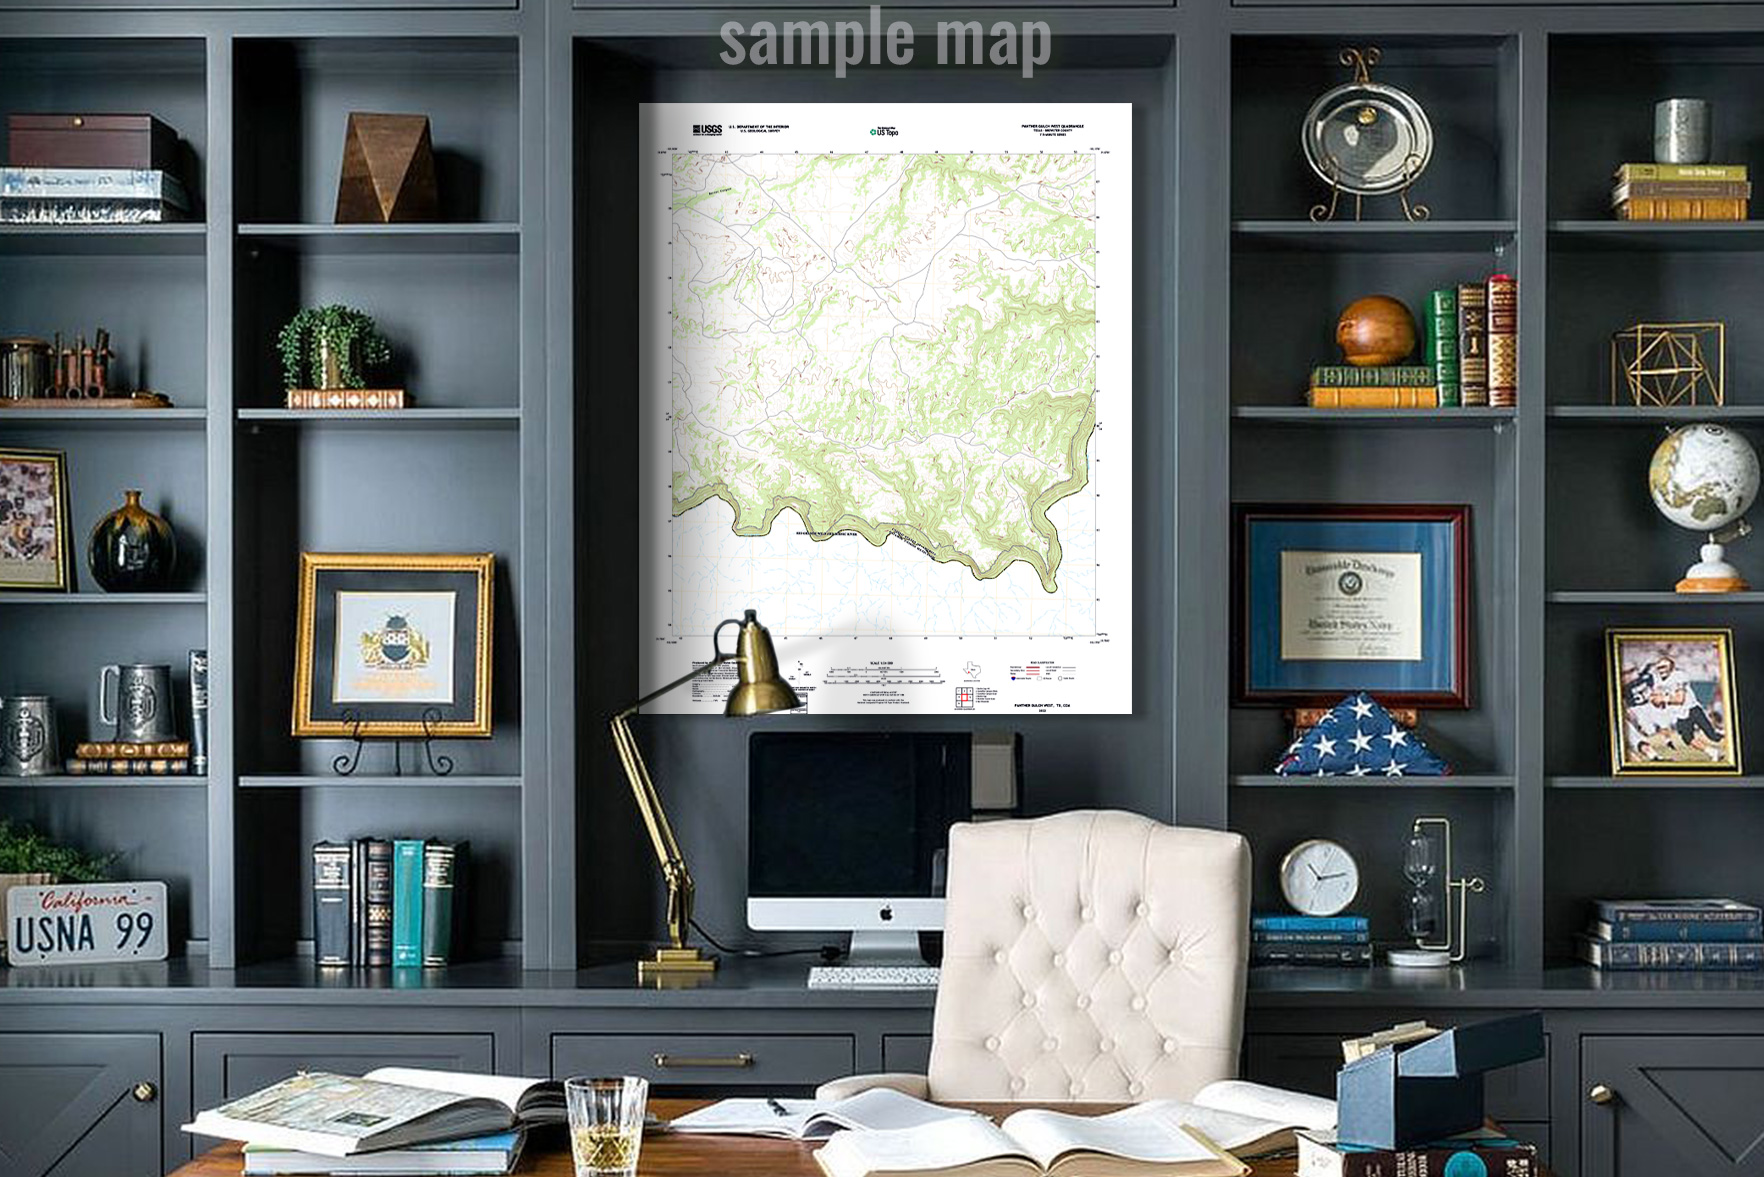 https://store.whiteclouds.com/media/large-canvas-wraps/large-canvas-wraps-current-usgs-maps/USGS-Sample-03.jpg